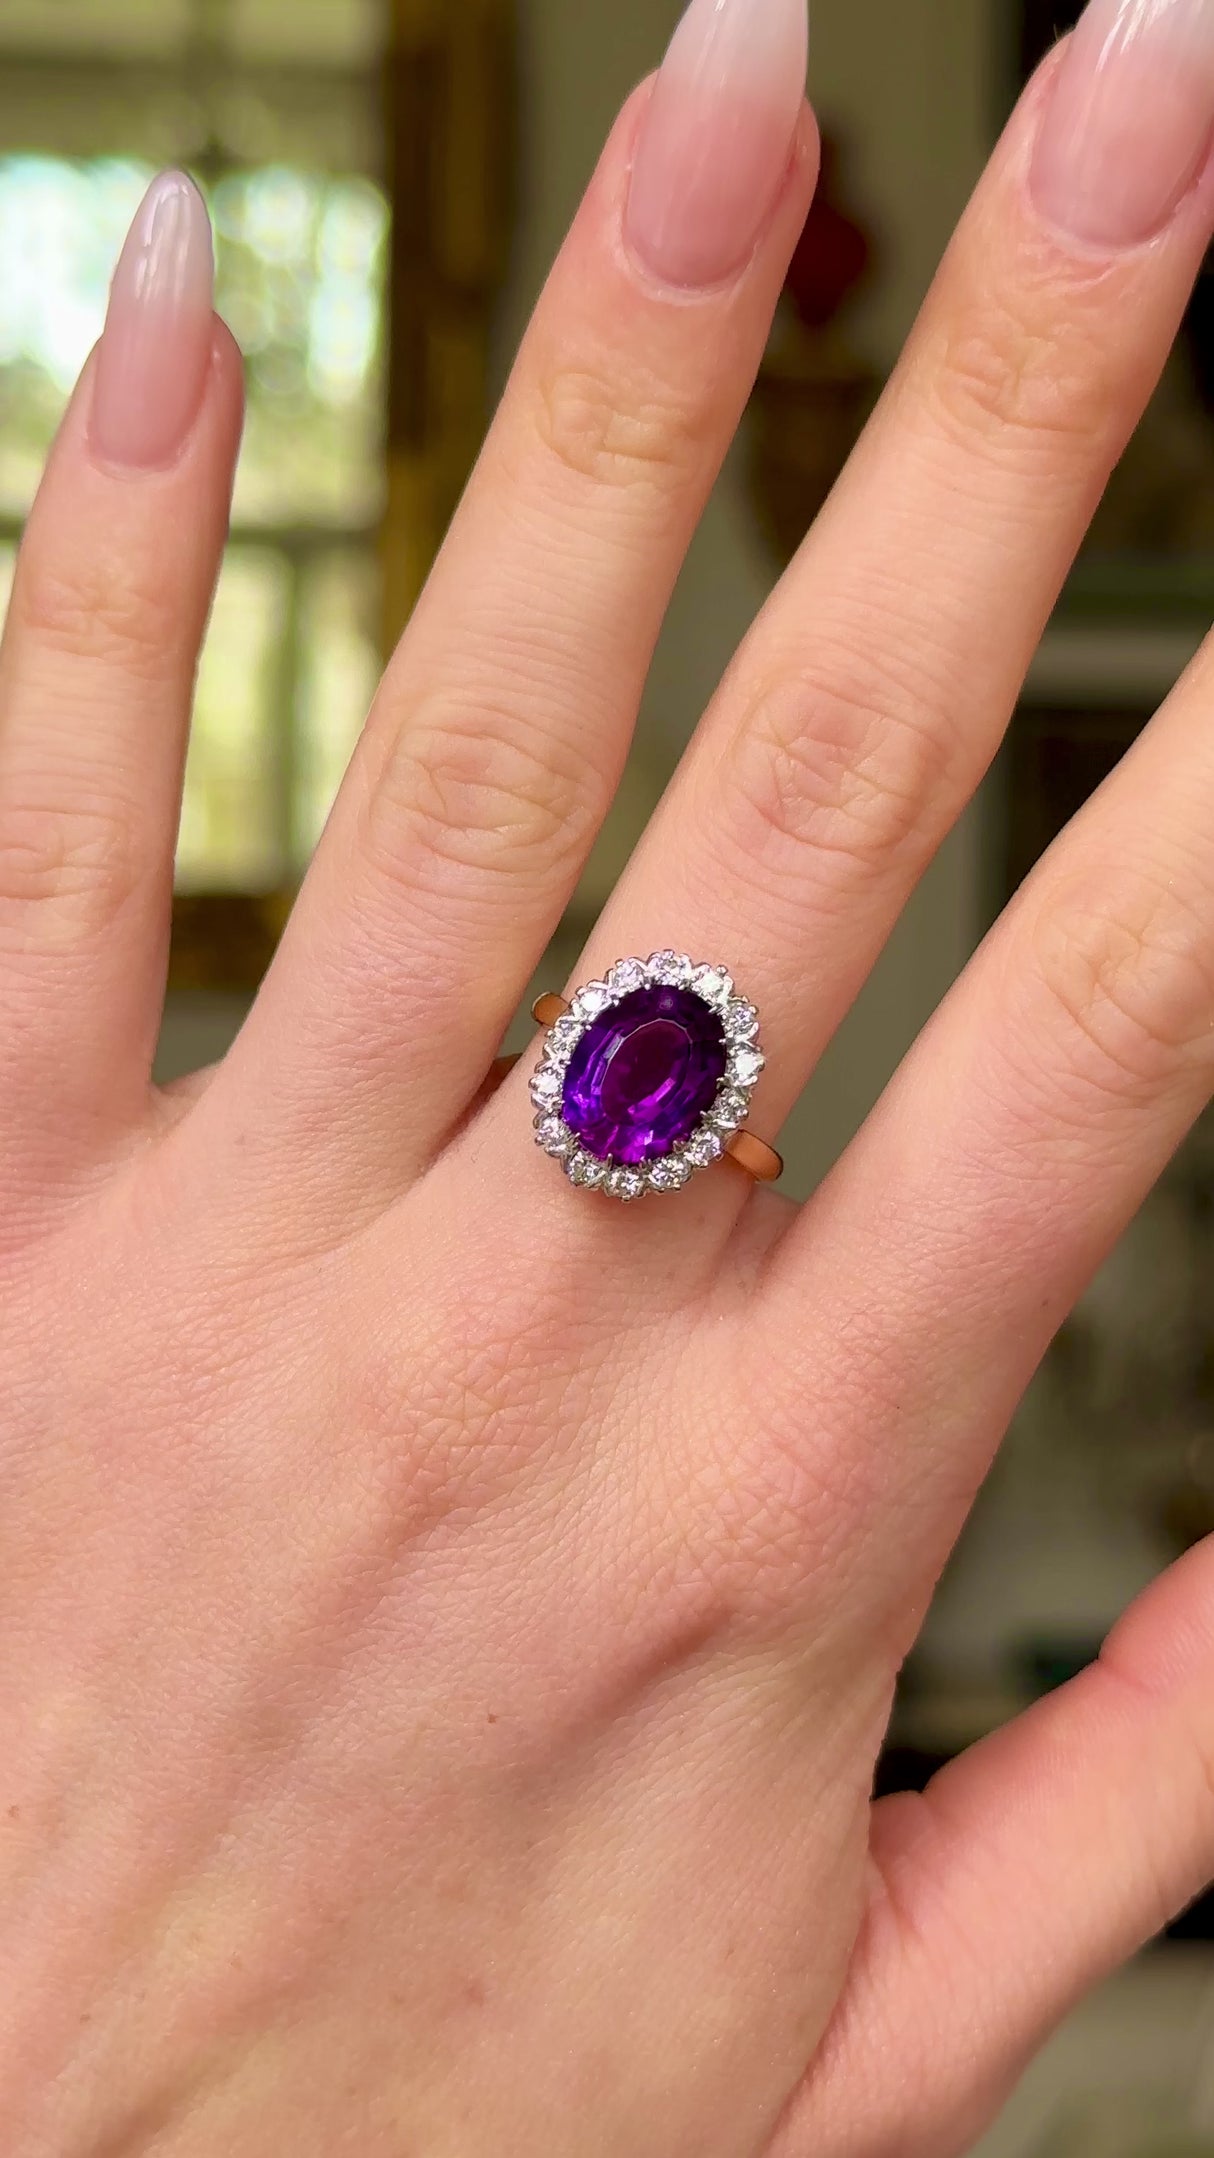 Vintage amethyst and diamond cluster ring, worn on hand and moved around to give perspective.